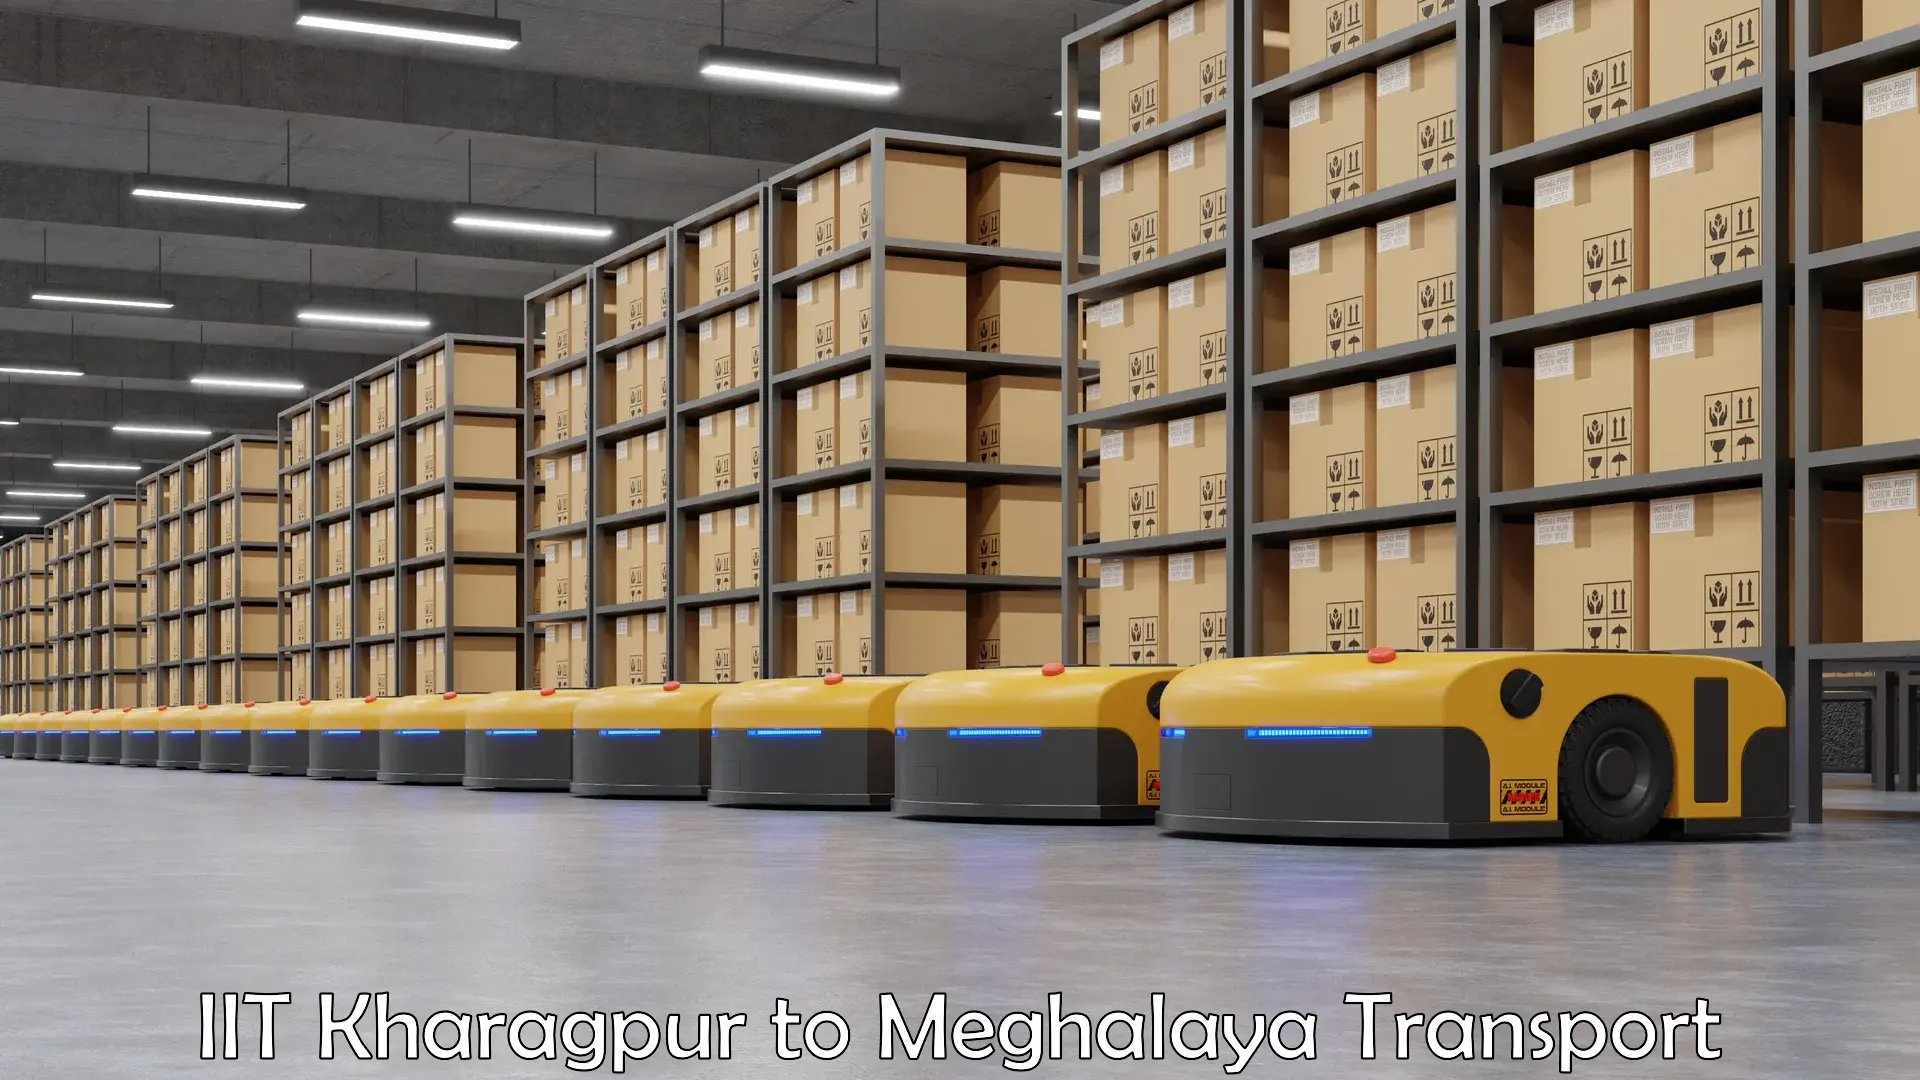 Goods delivery service IIT Kharagpur to Meghalaya